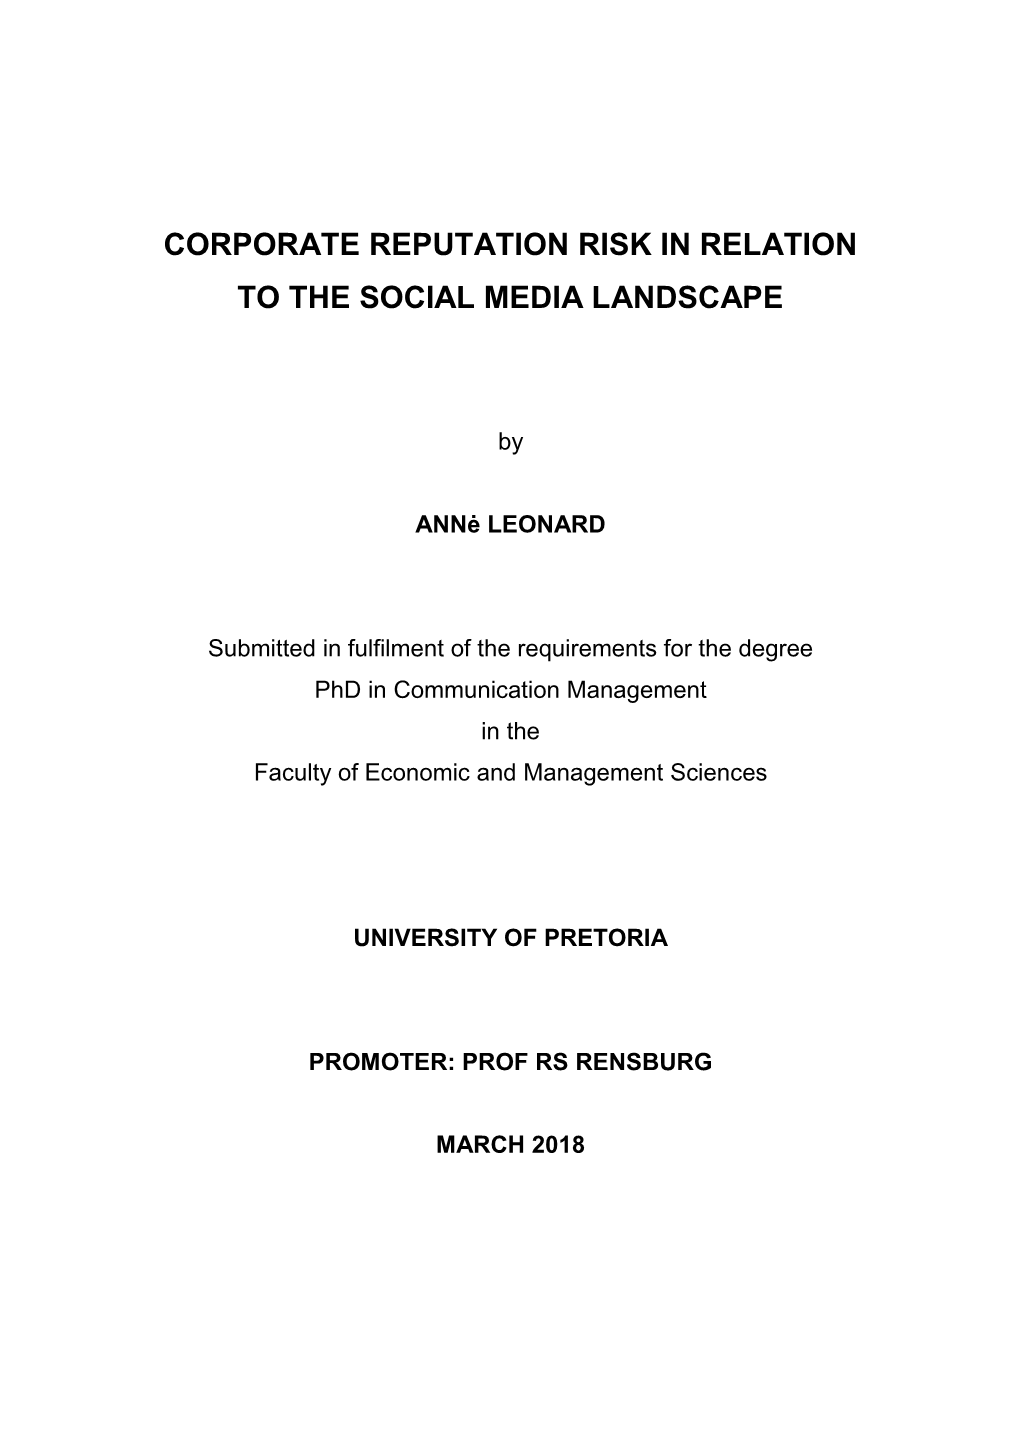 Corporate Reputation Risk in Relation to the Social Media Landscape